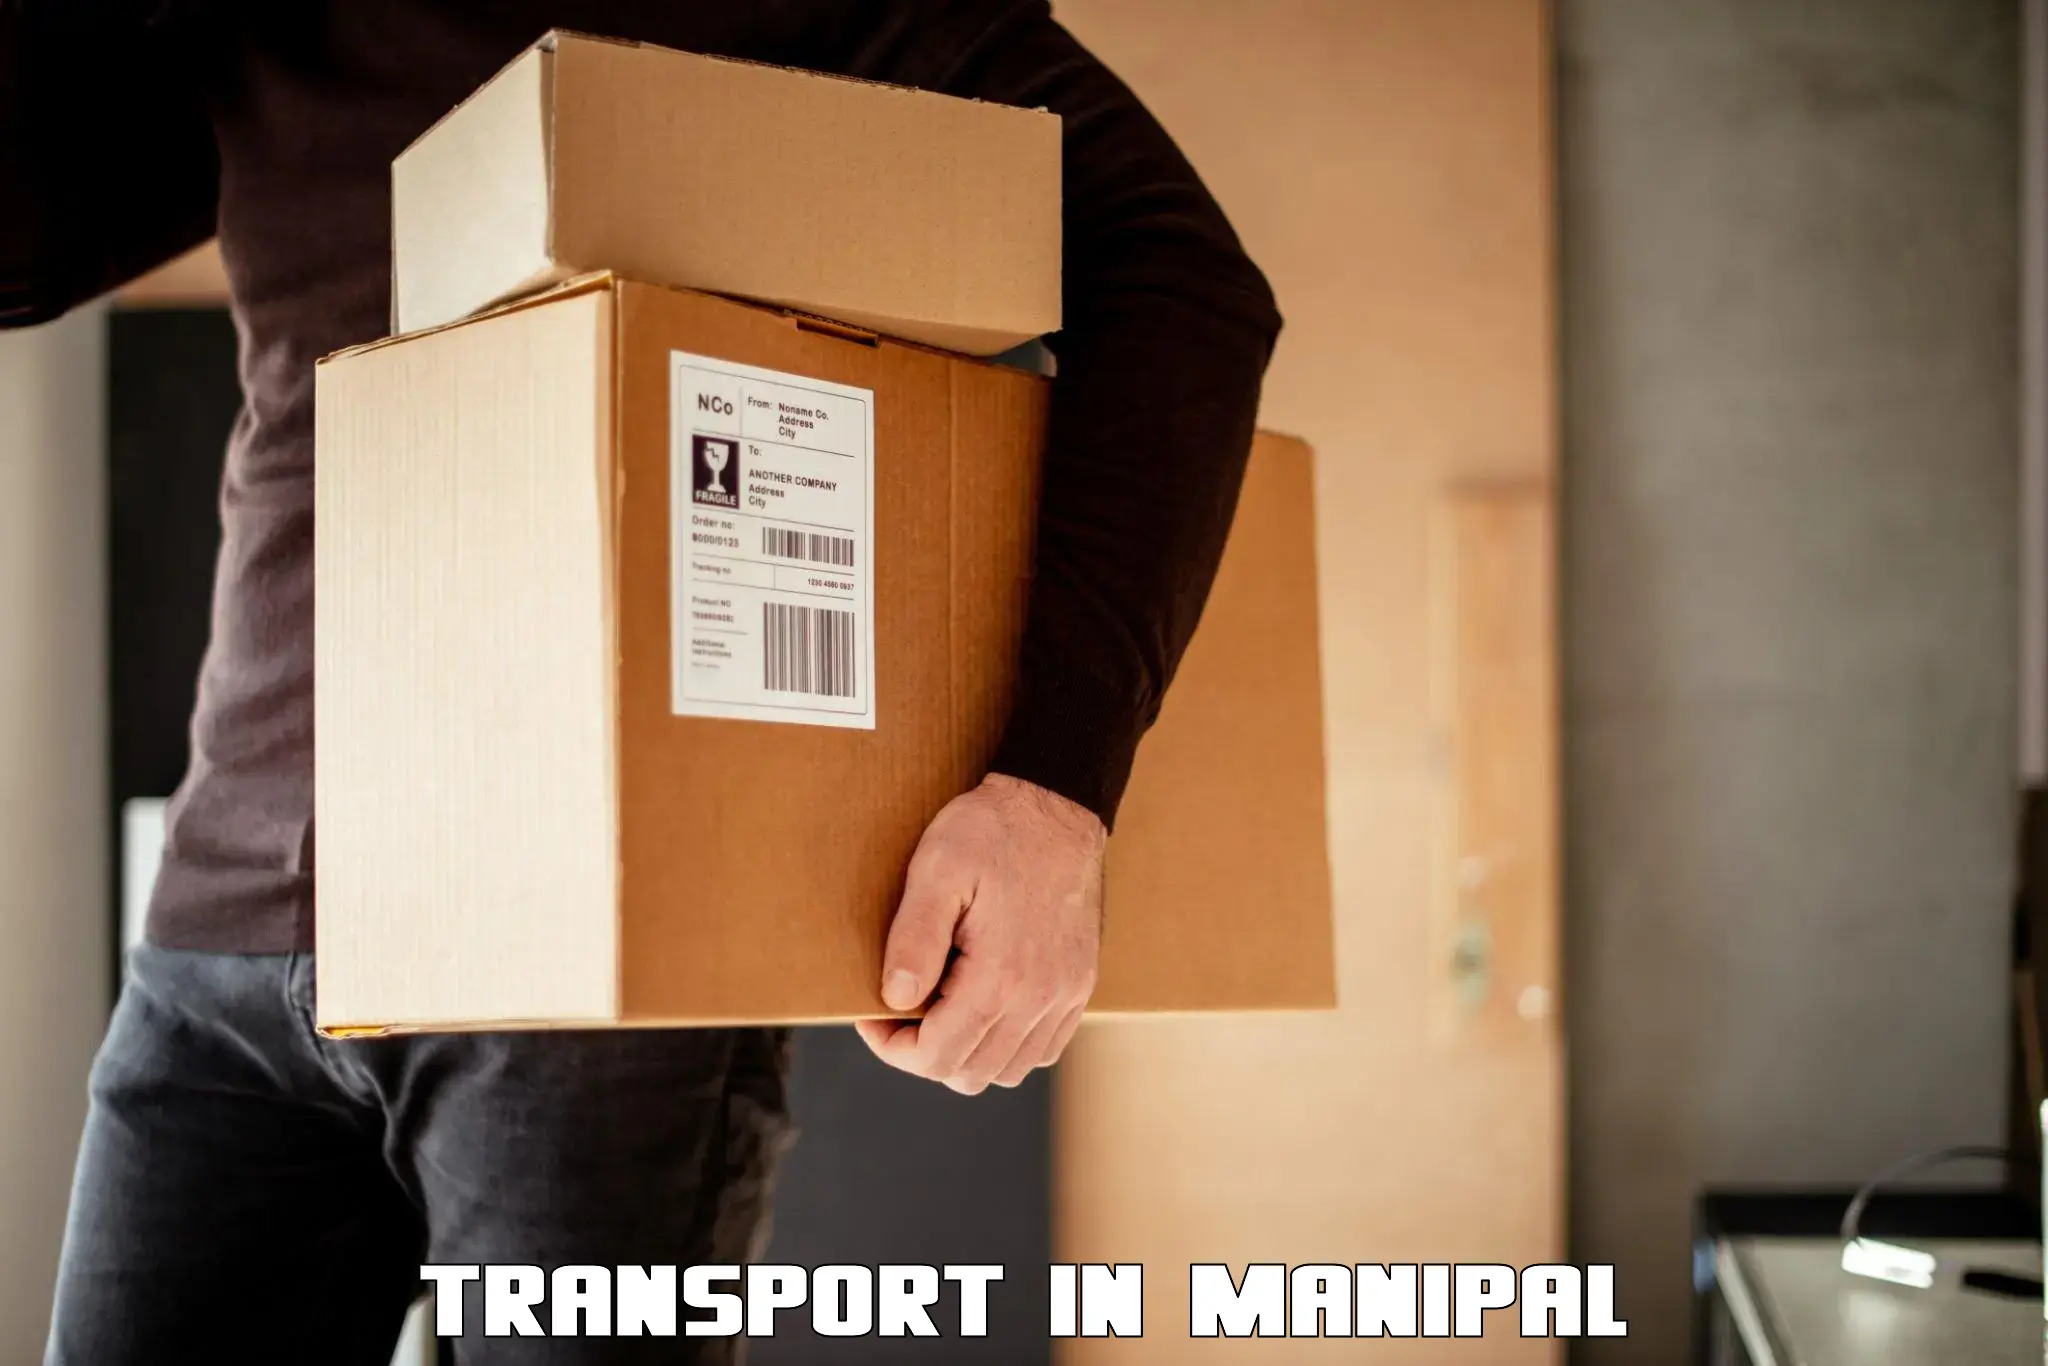 Transportation services in Manipal